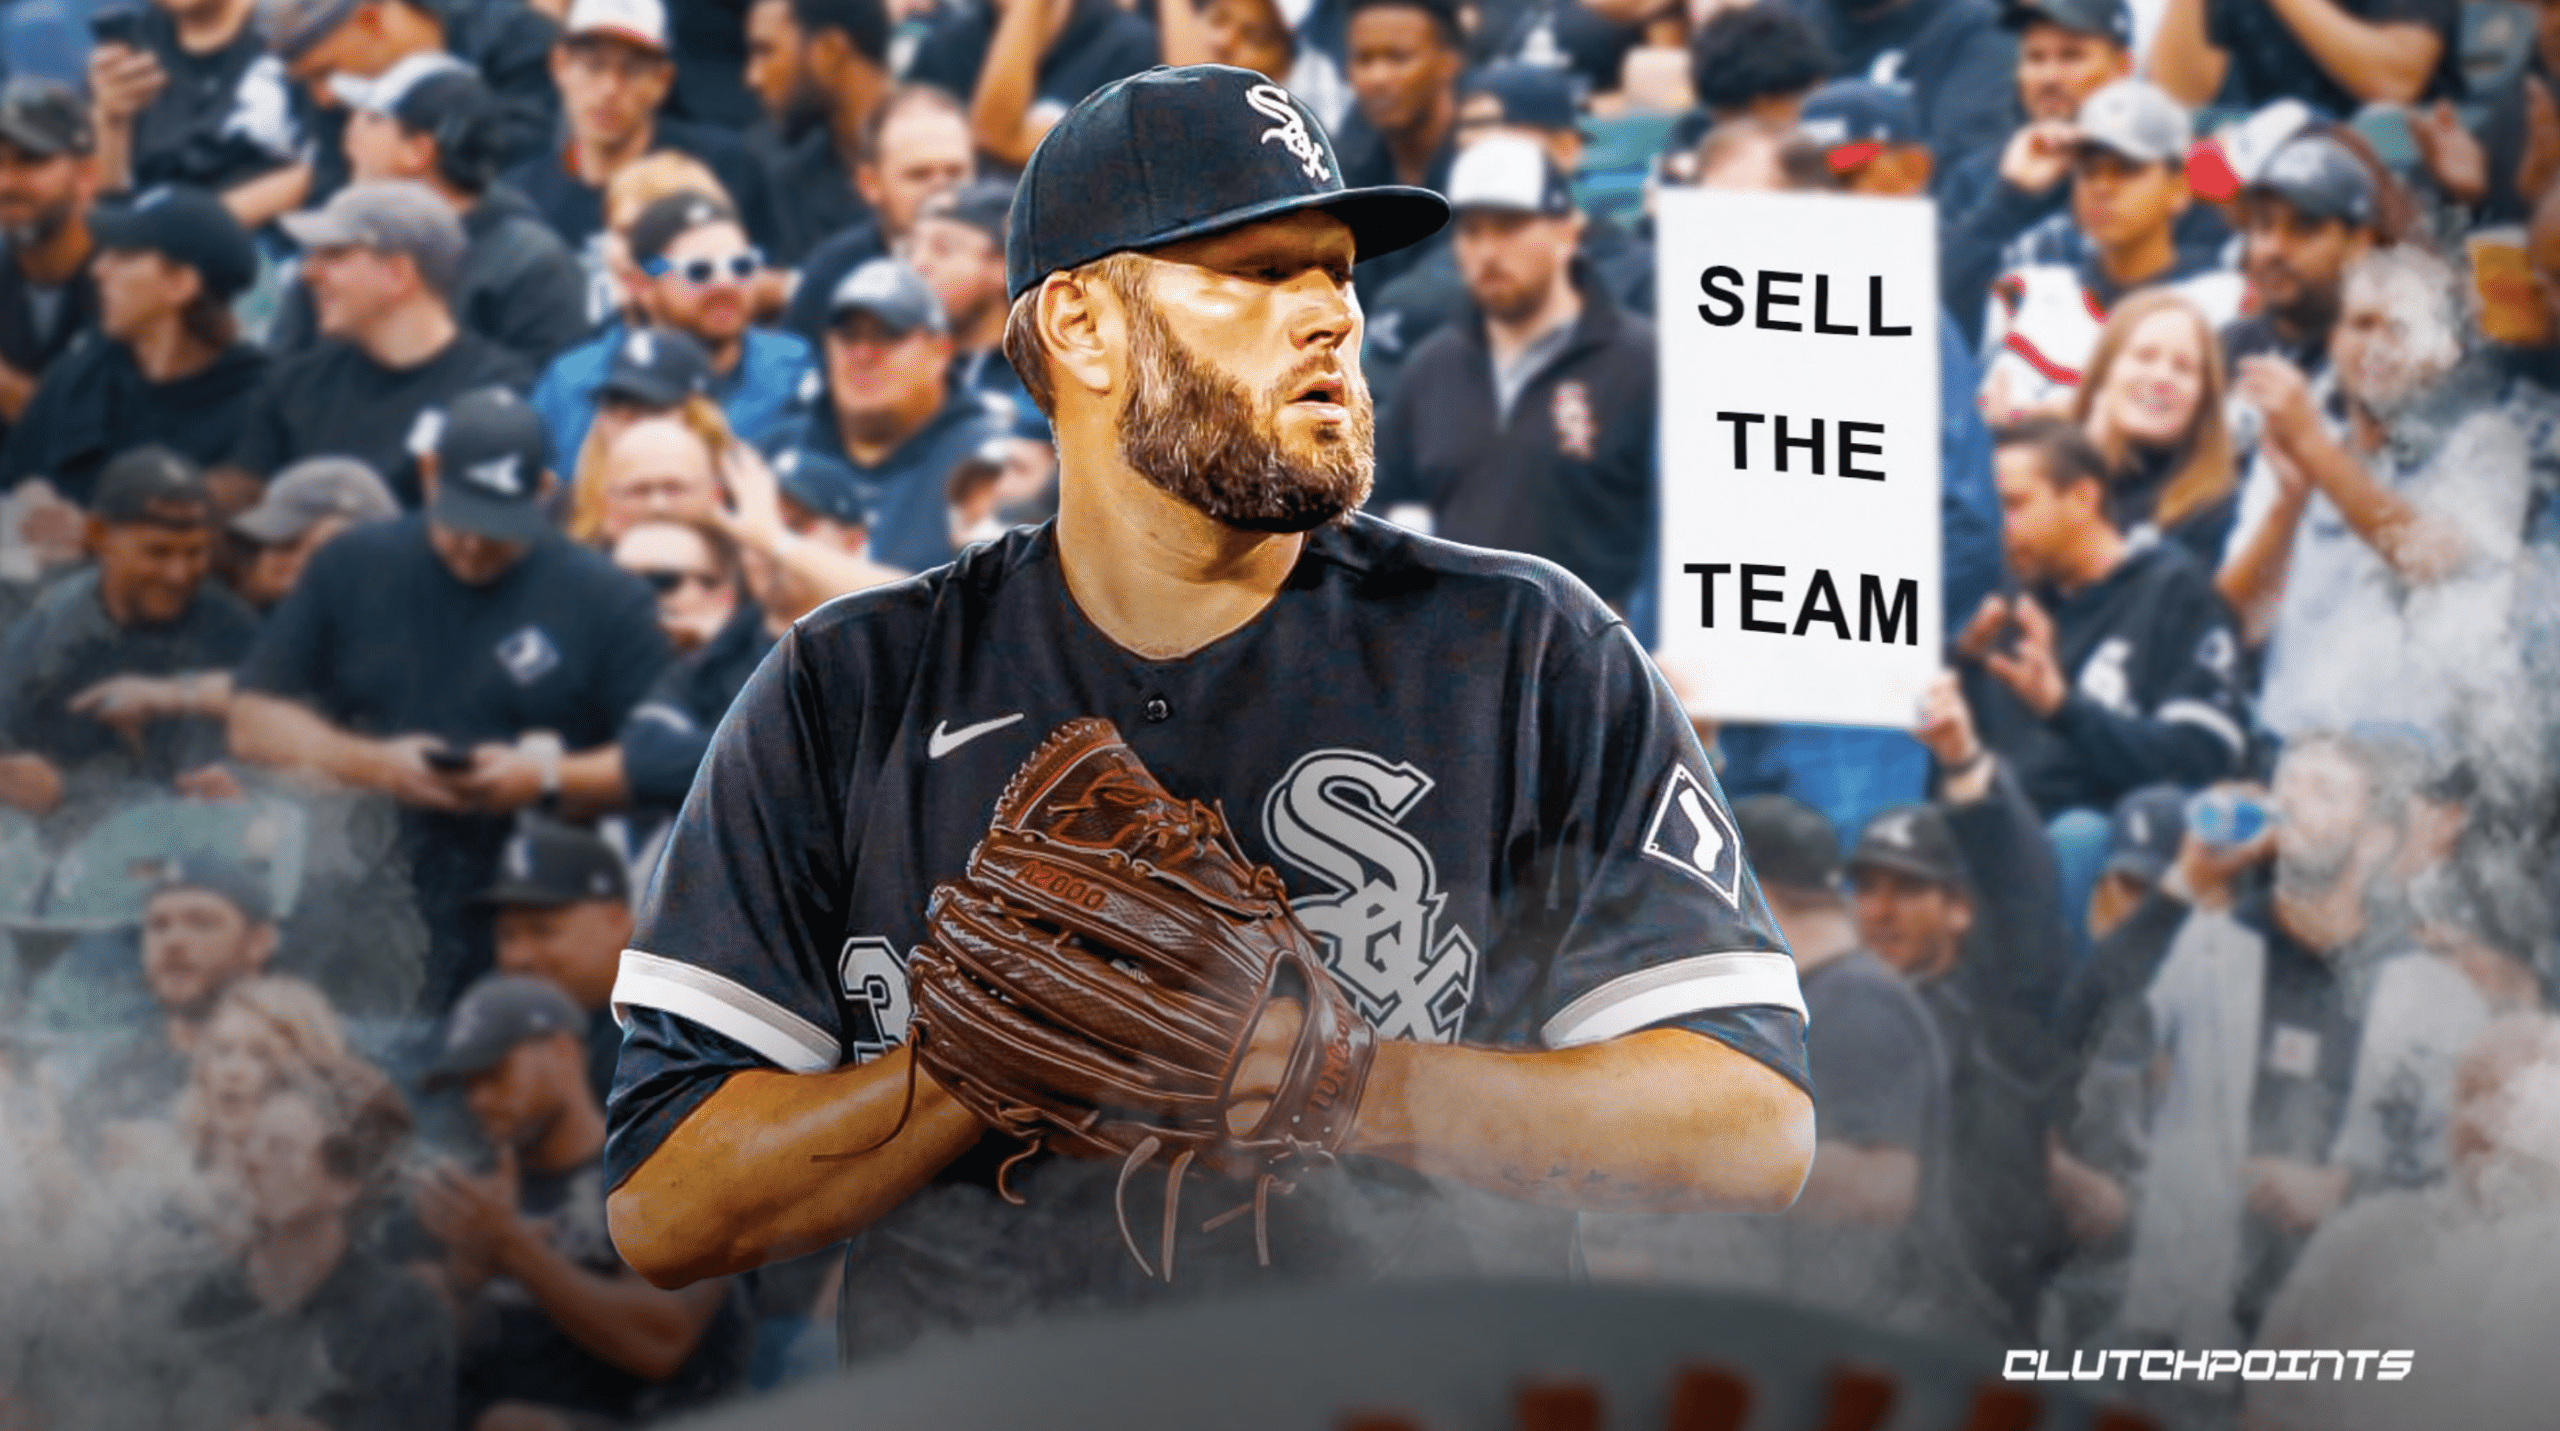 Chicago White Sox Sell The Team Shirt